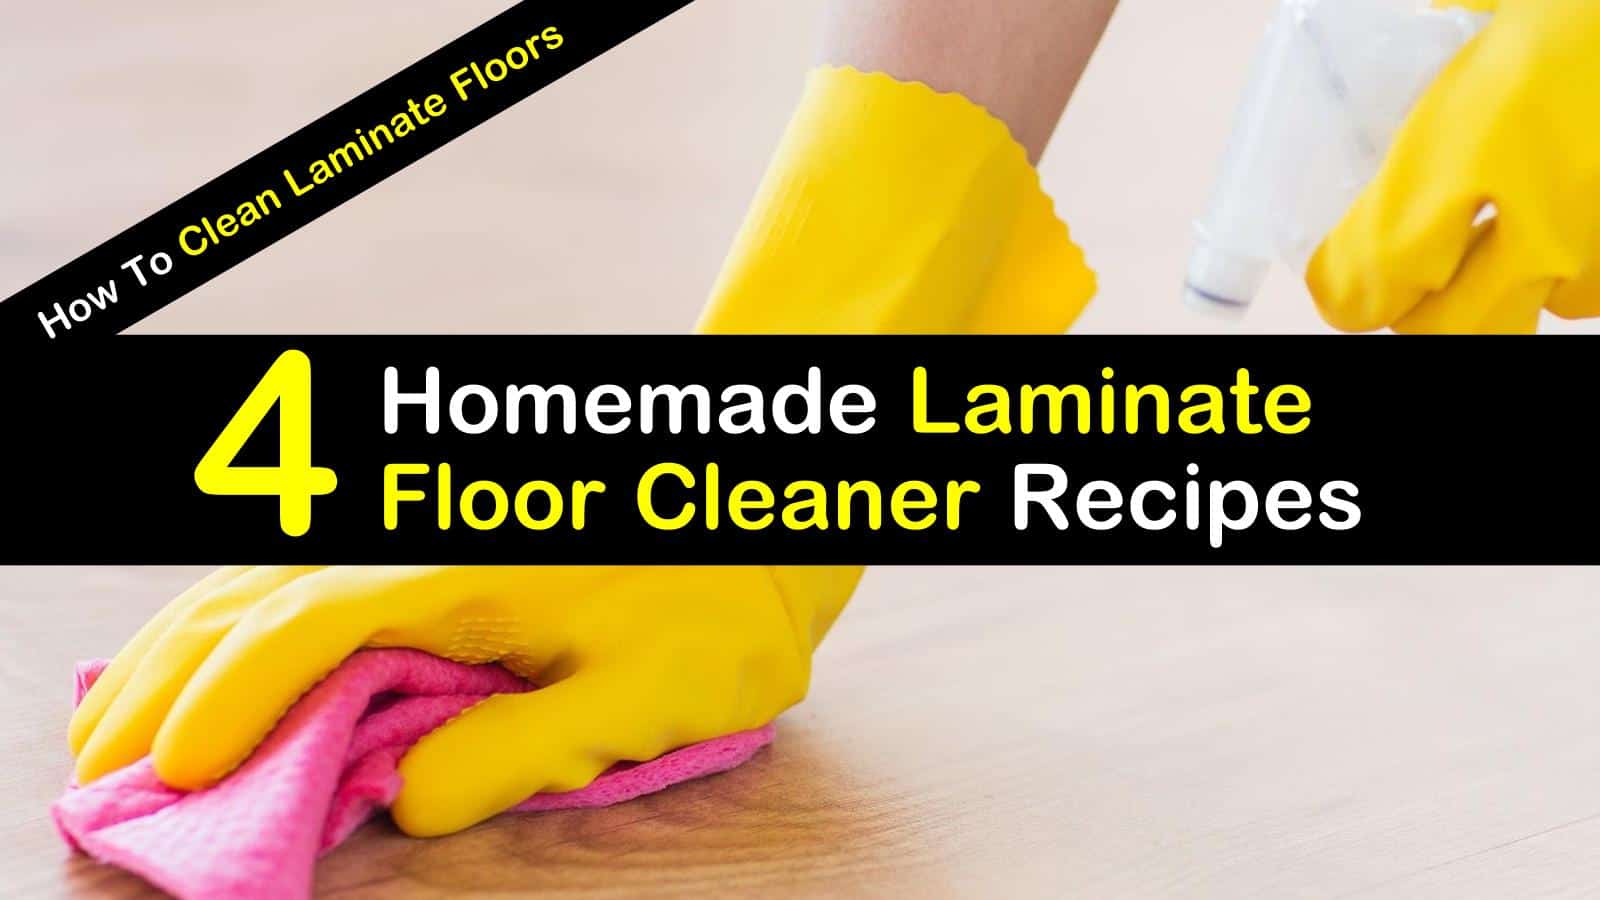 How To Clean Laminate Floors 4 Homemade Laminate Floor Cleaner Recipes,750 Ml To Oz